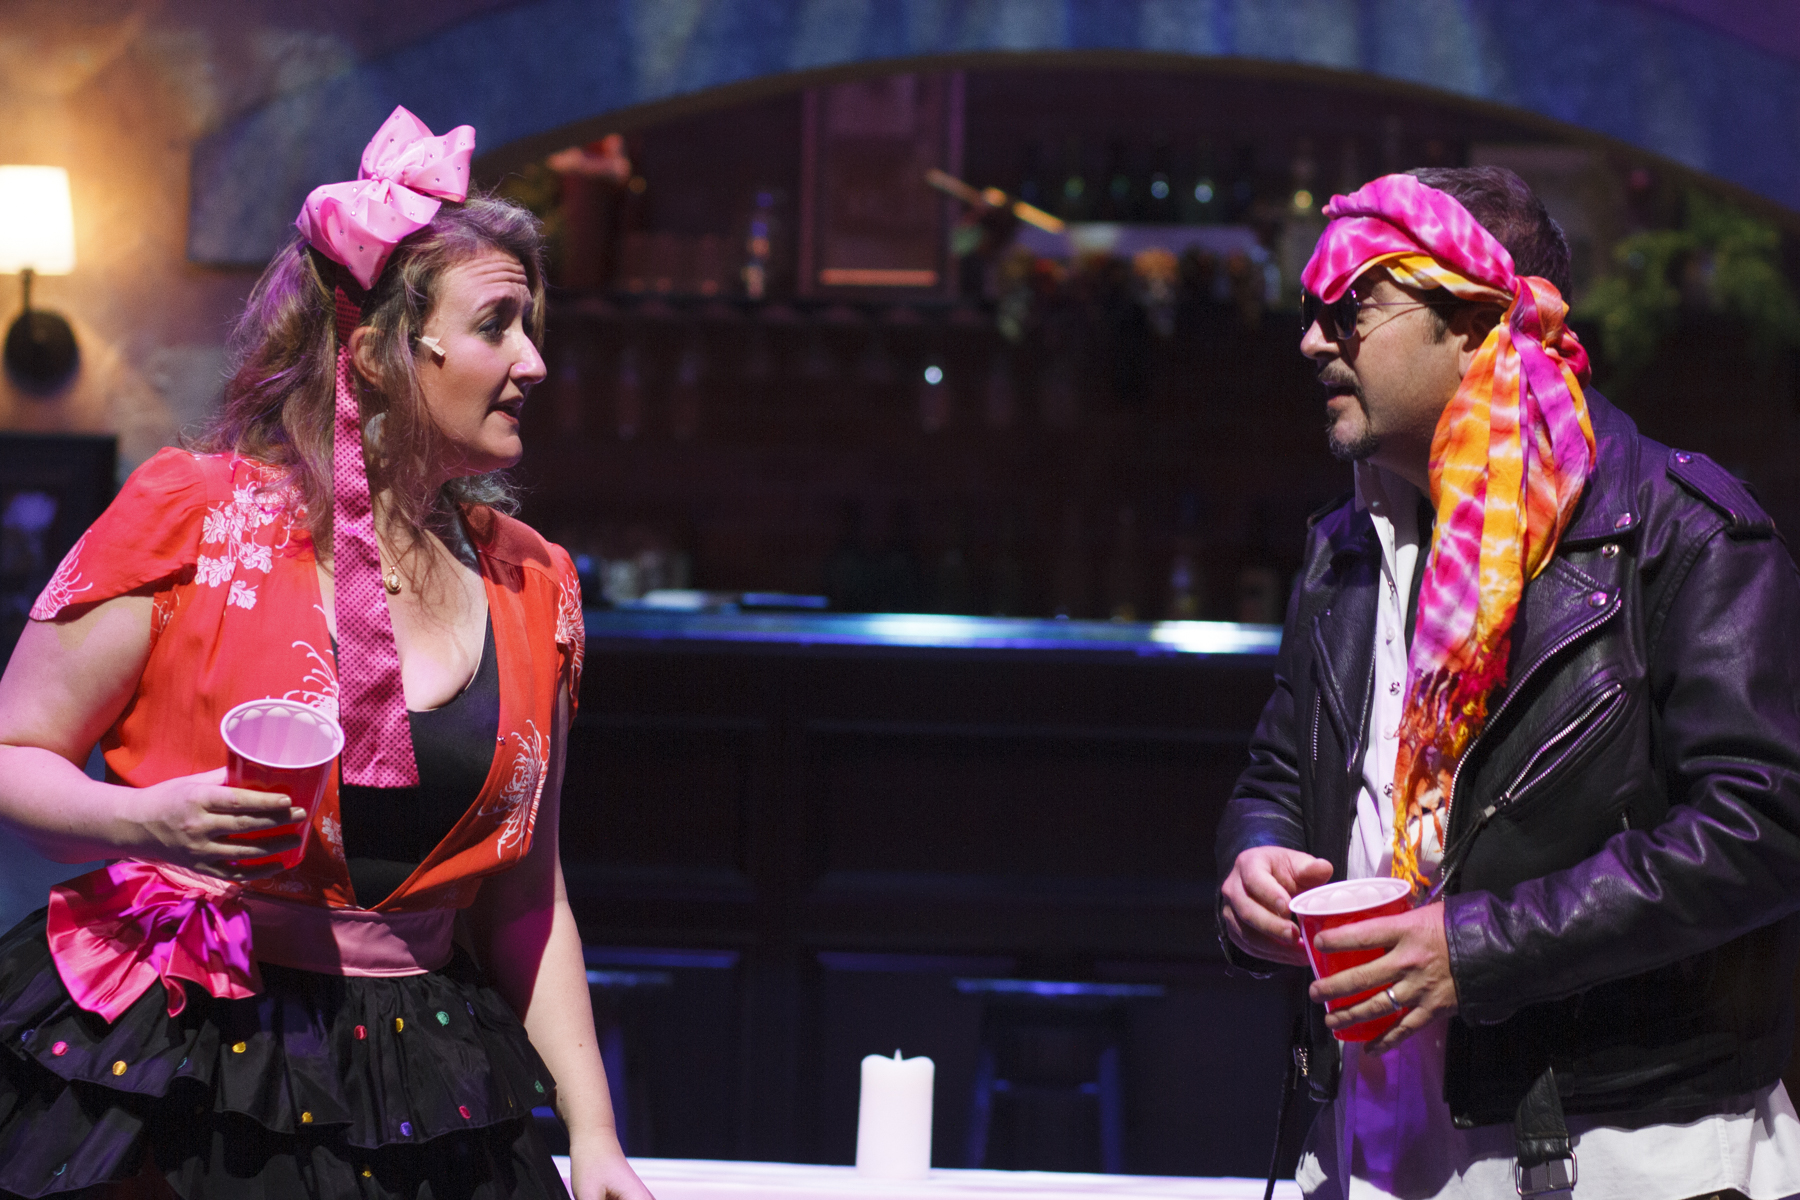 The Last Wide Open is brought to life by Rebecca Shor and Ethan Butler as a young waitress and Italian immigrant who are the unlikely couple at the center of this unconventional romantic musical comedy by Audrey Cefaly. Photo by Gillian Mariner Gordon.